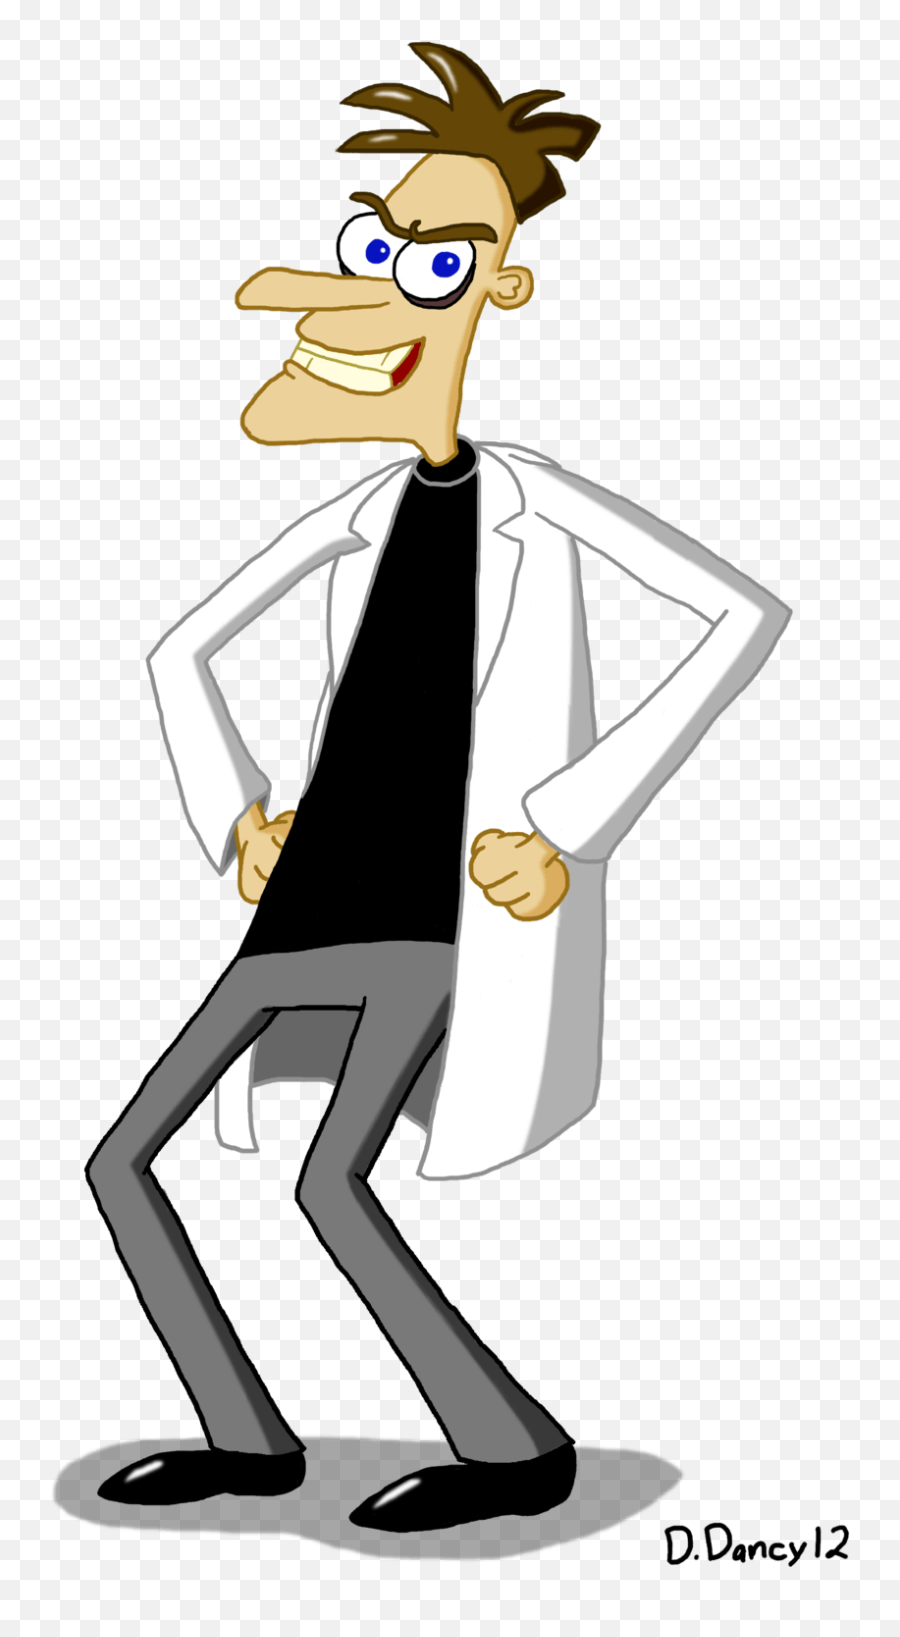 Record A Message In Doofenshmirtz Voice From Phineas And Ferb - Phineas And Ferb Dr Doofenshmirtz Png,Phineas And Ferb Logo